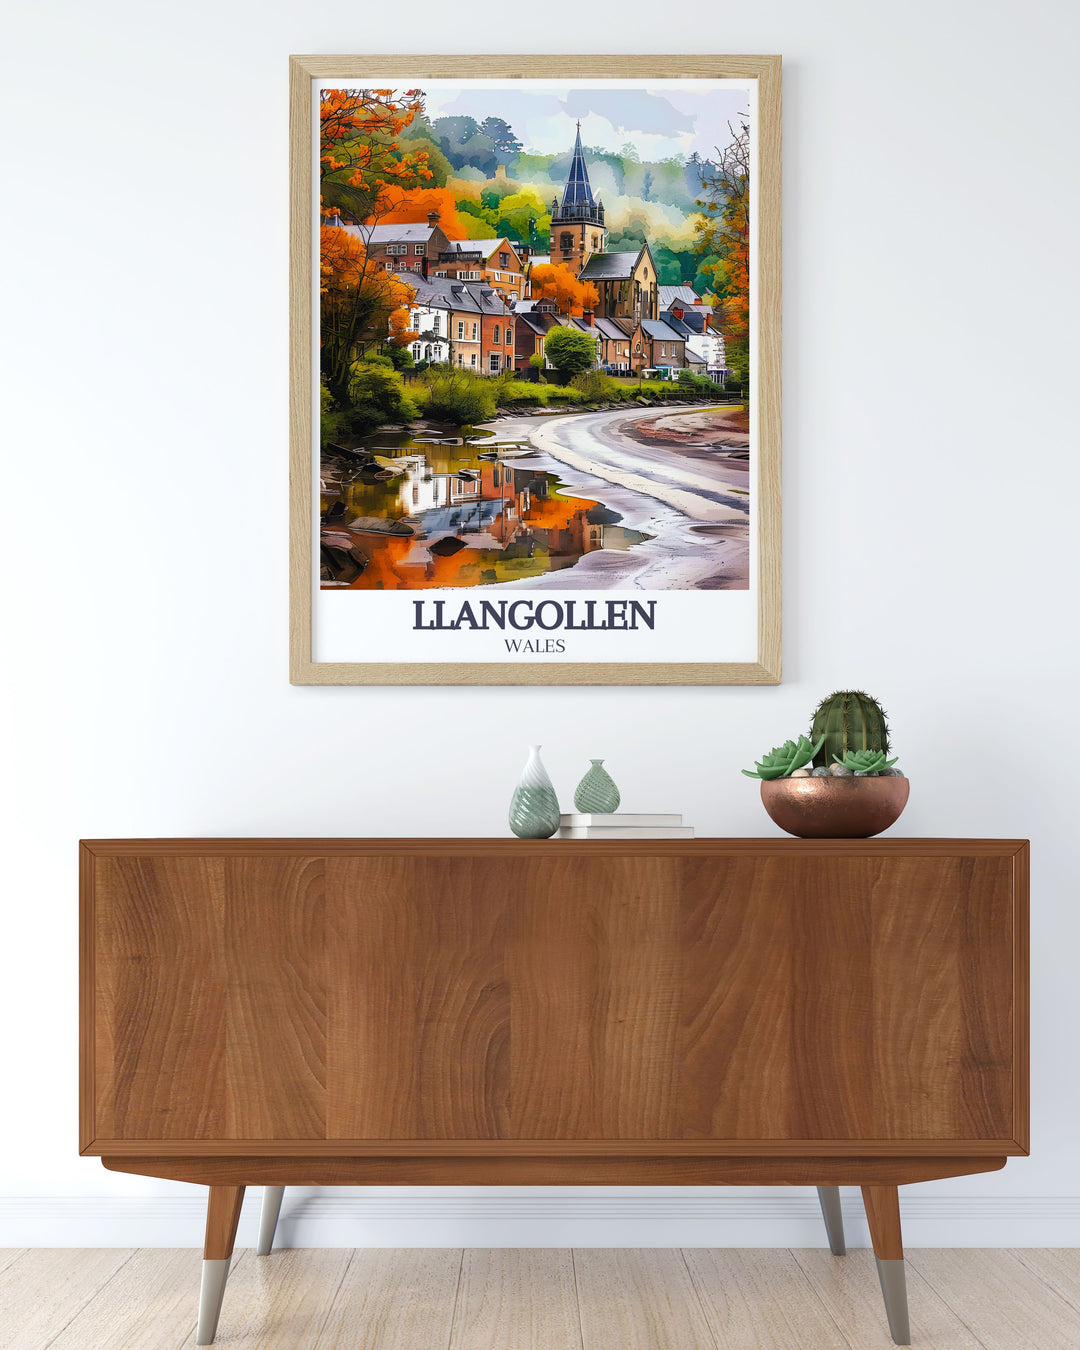 Enhance your walls with this elegant art print of River Dee, Llangollen Canal, and Llangollen Methodist Church, perfect for UK art enthusiasts.